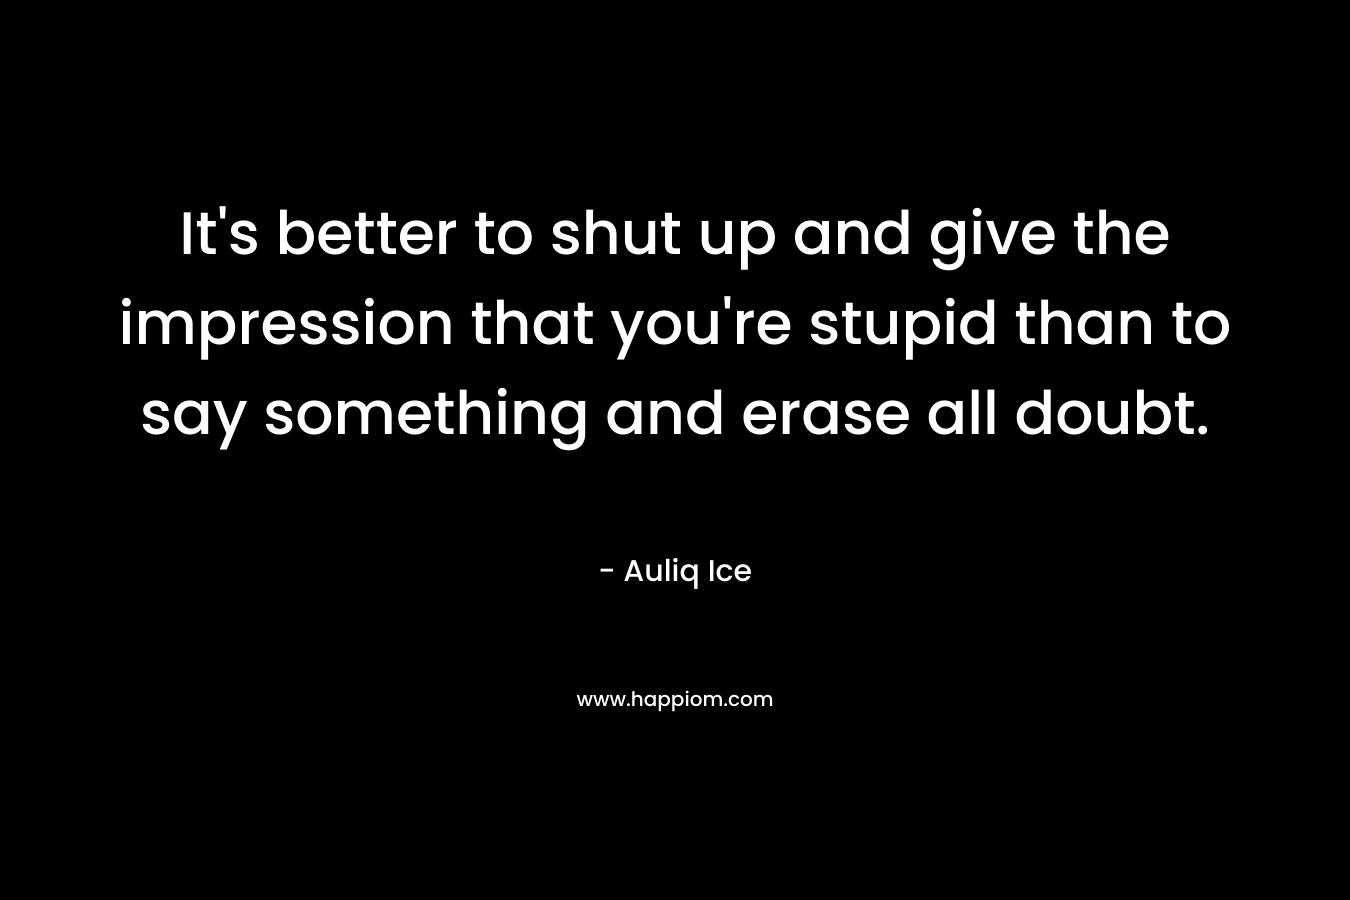 It's better to shut up and give the impression that you're stupid than to say something and erase all doubt.